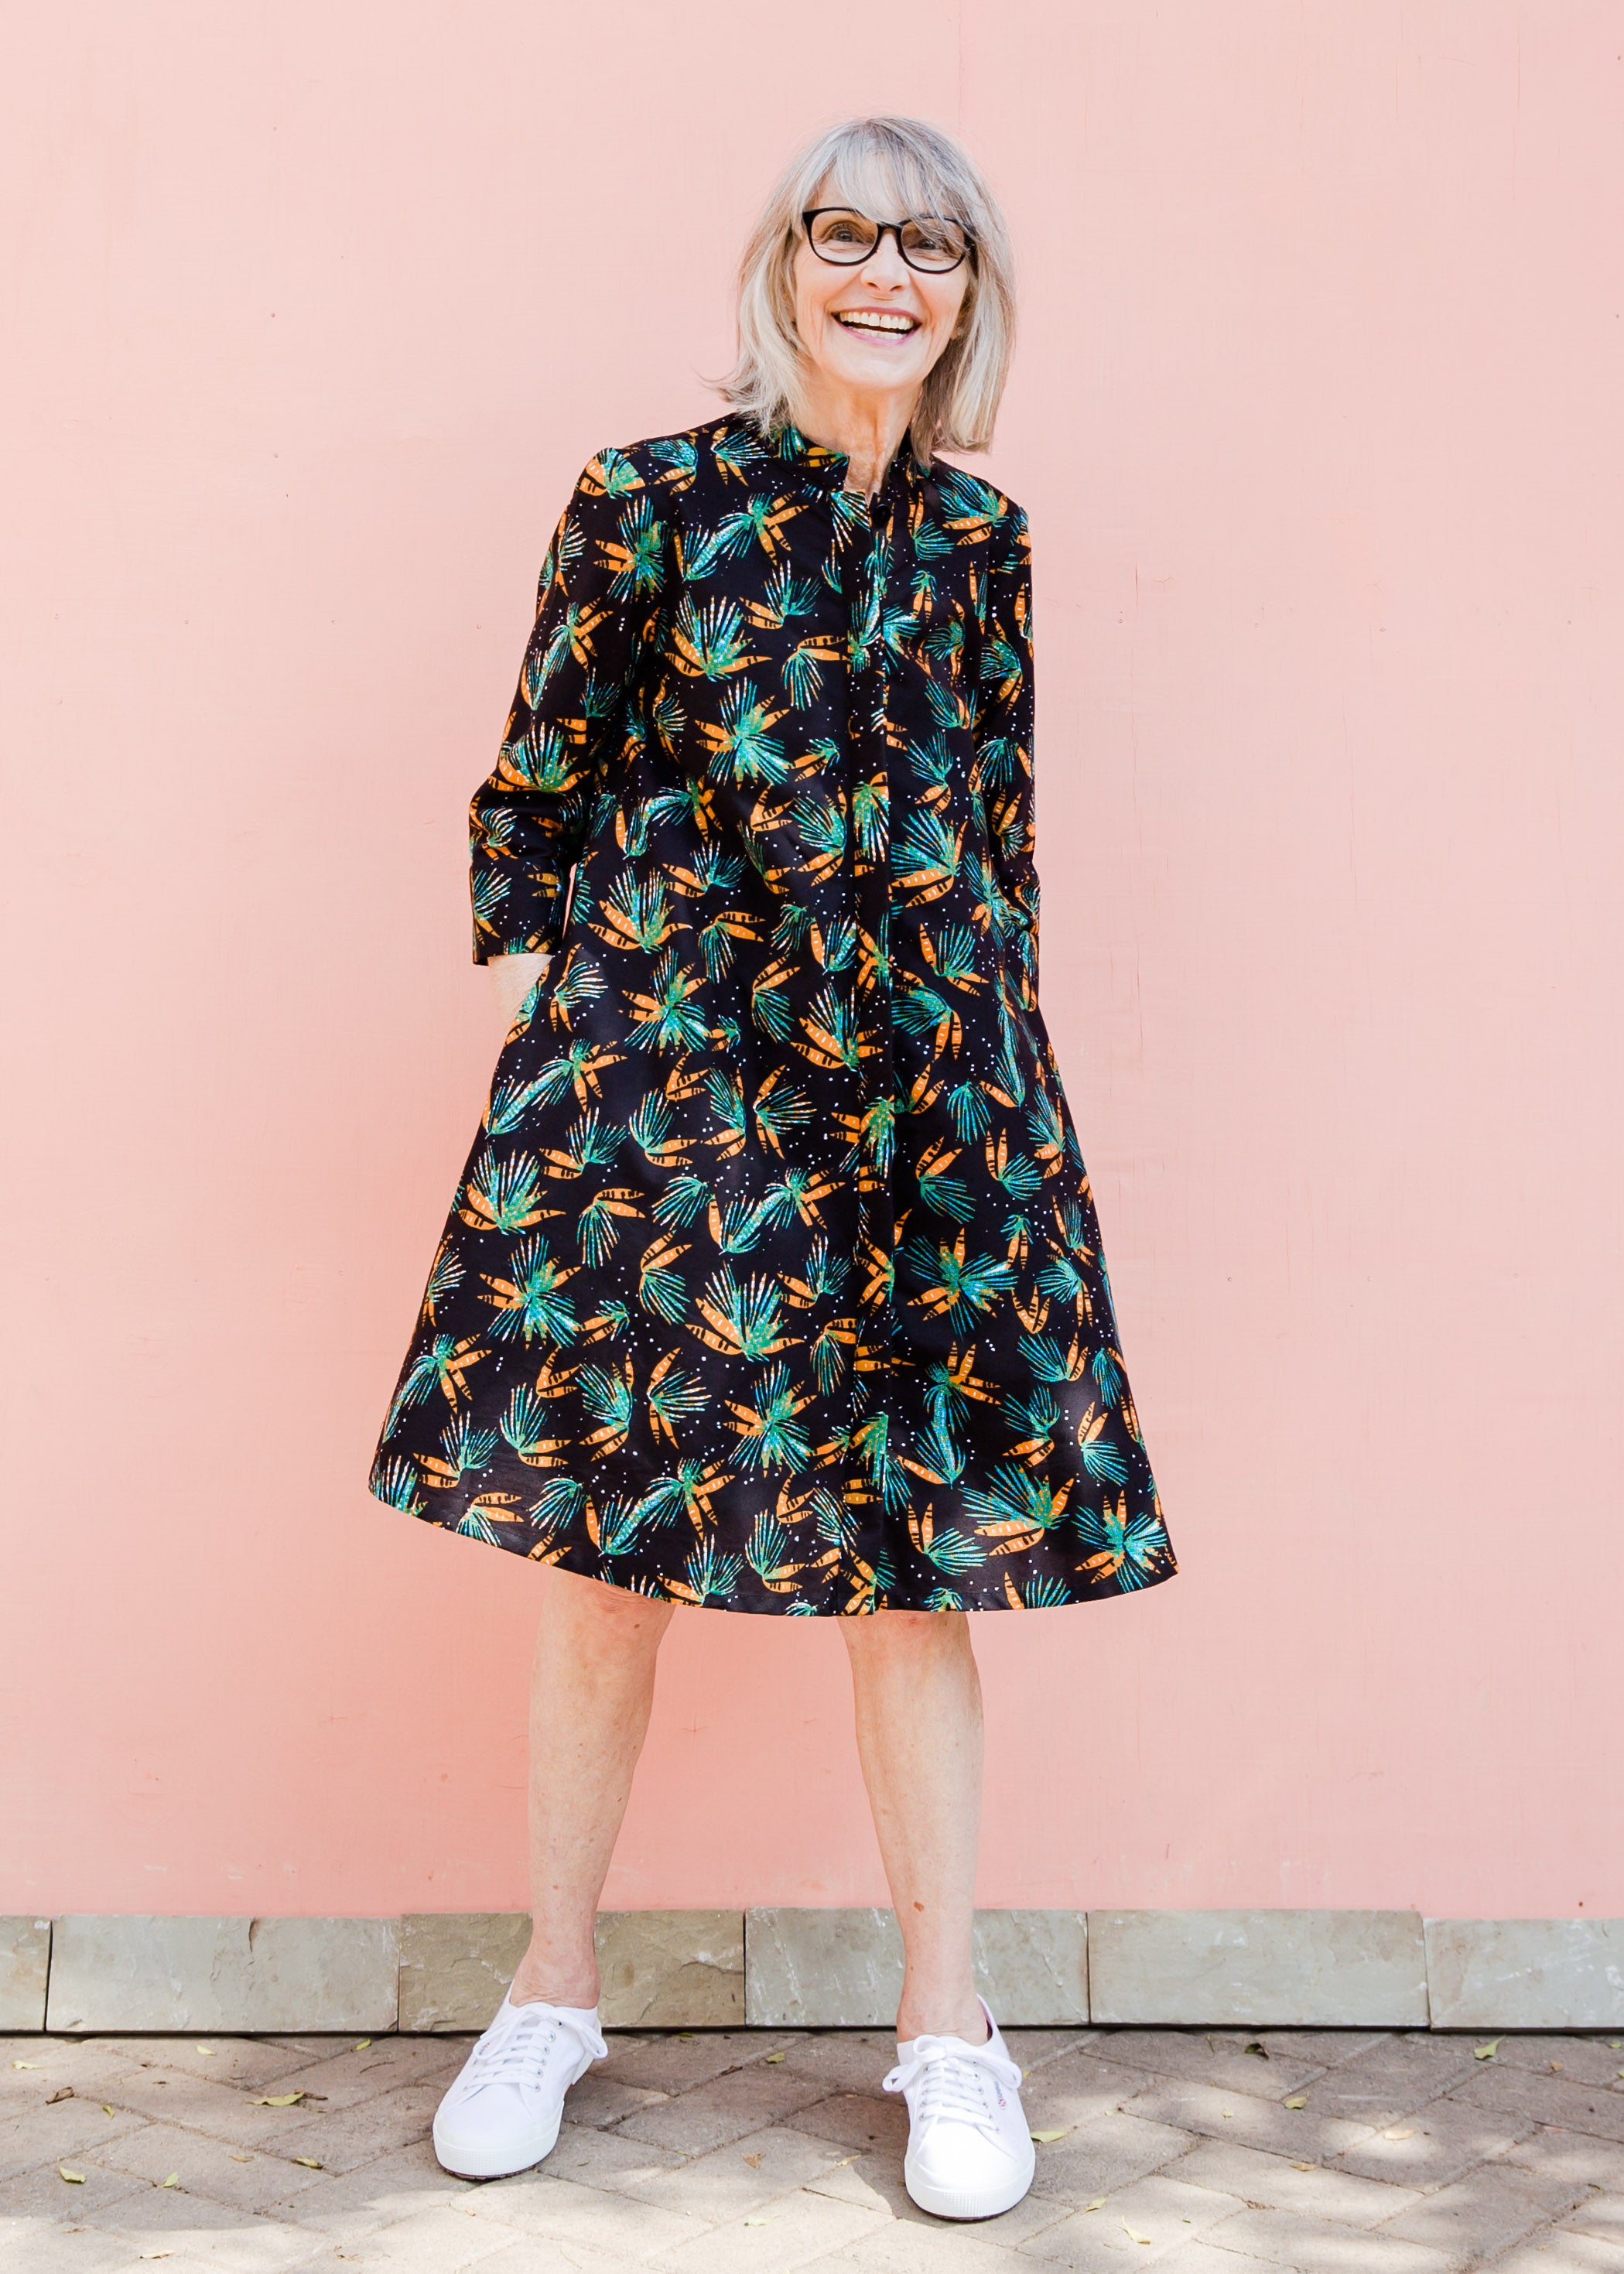 Model wearing black dress with teal and orange leaves with white dots.